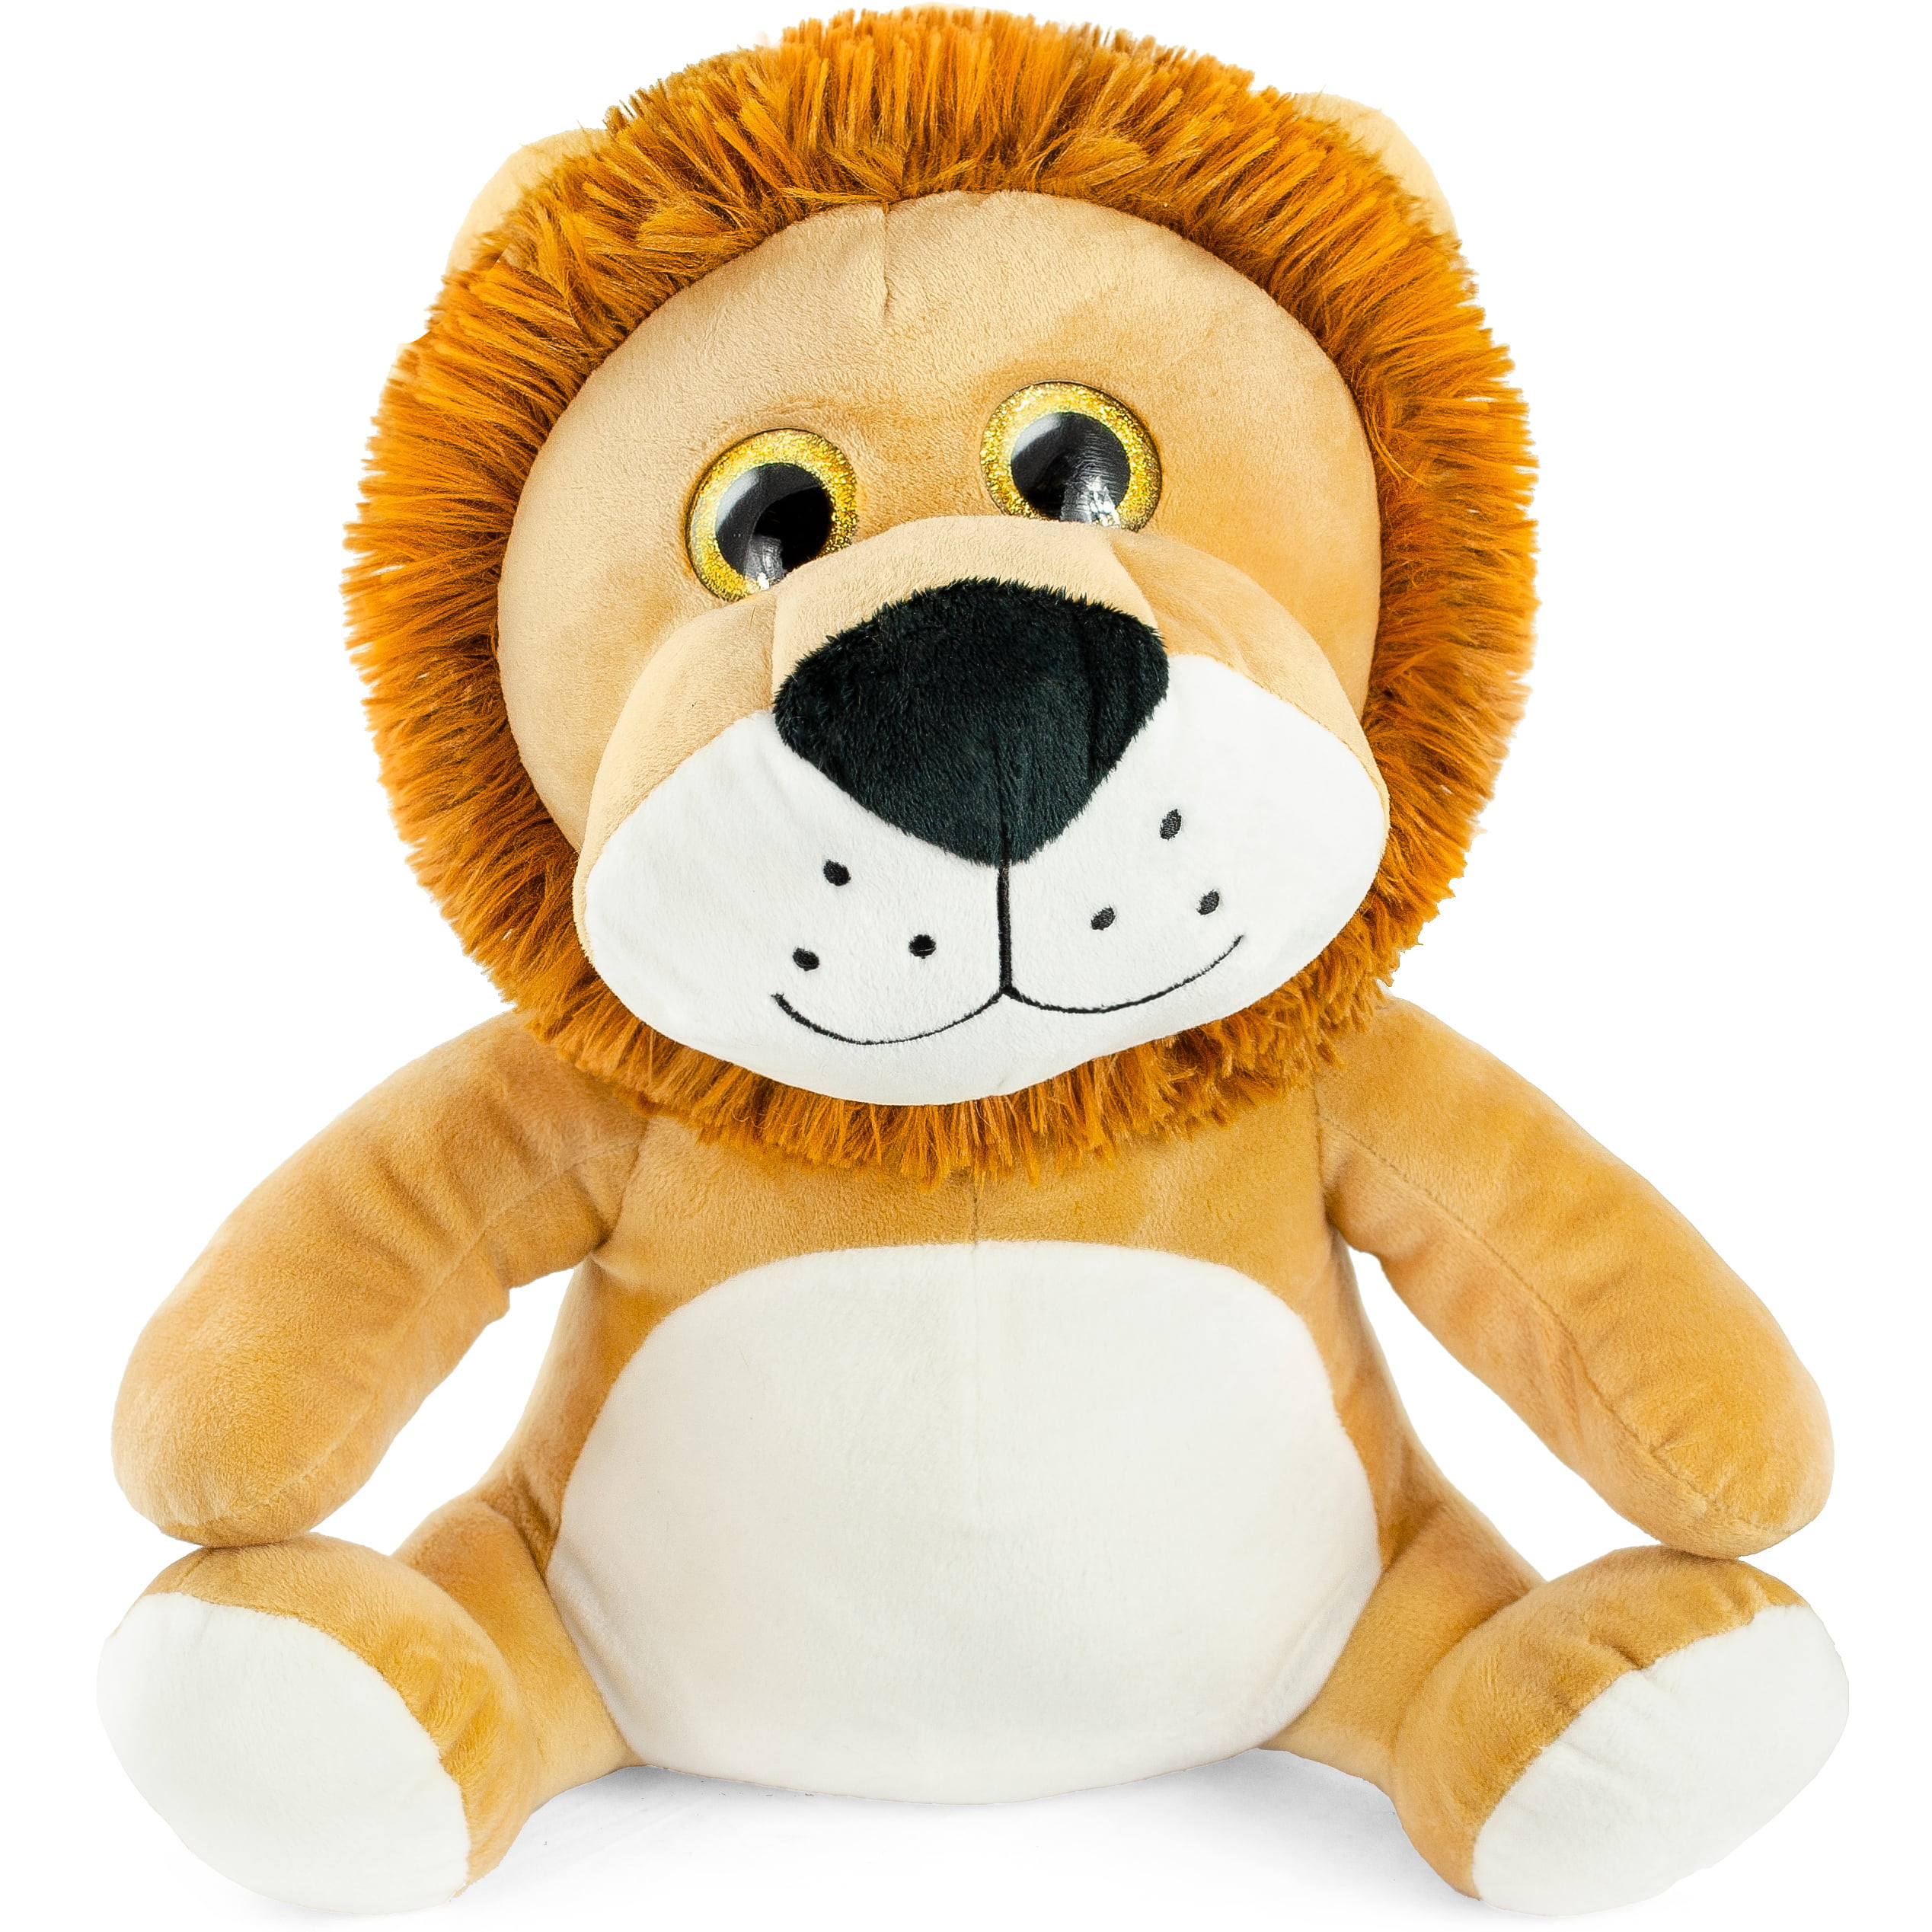 Lion Plush Toy Soft Stuffed Huge Animal Big Jungle Gift Kids Toy Teddy 28 inches 